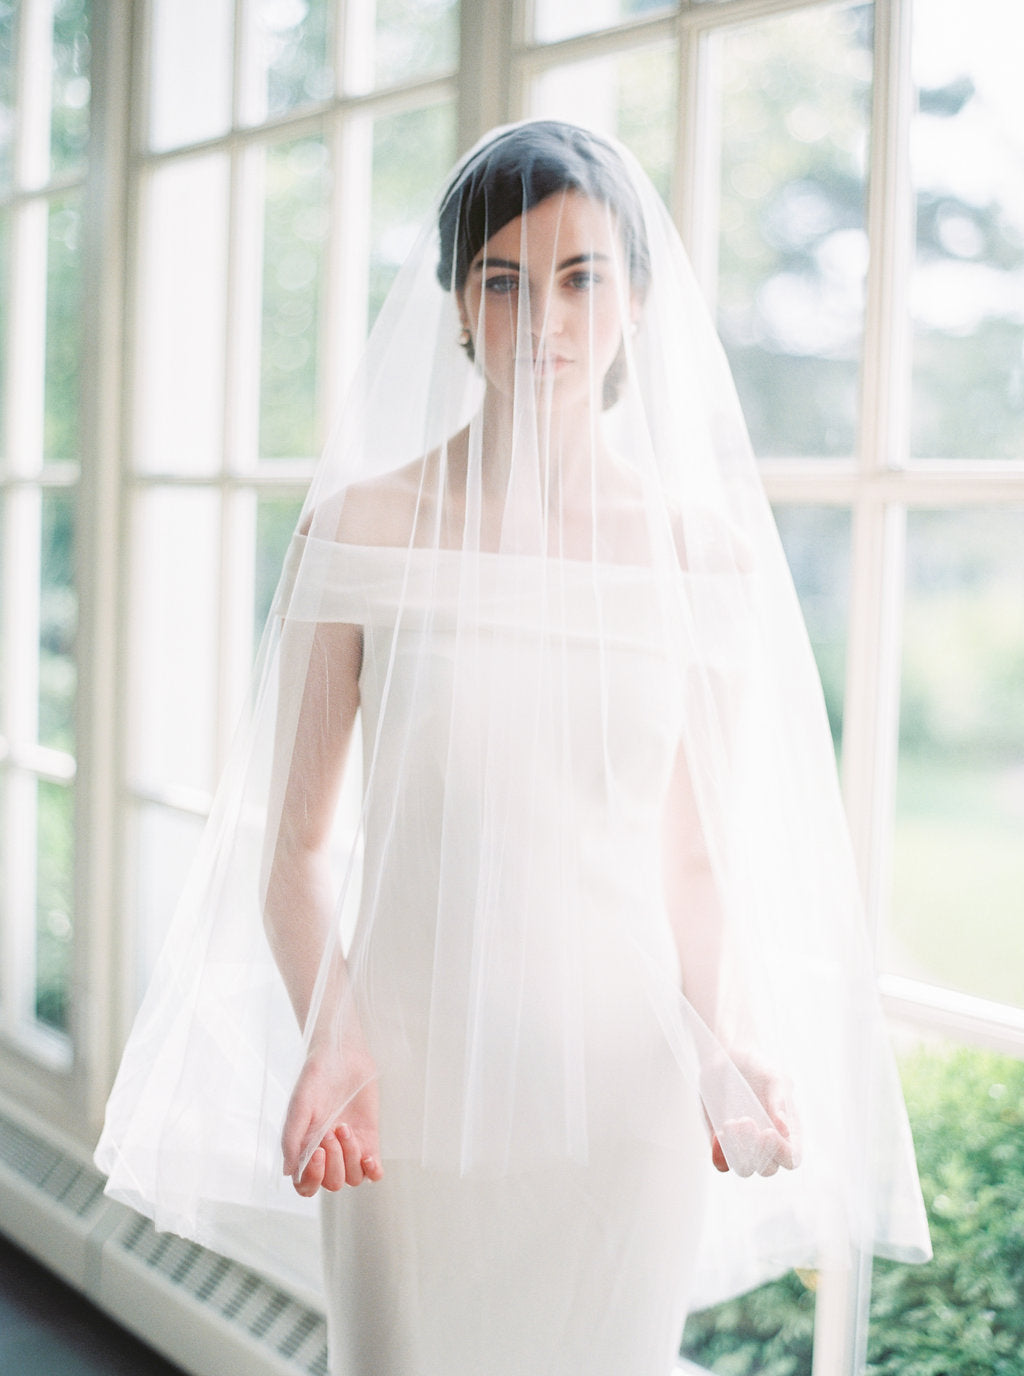 Floor Length Barely There Veil Blusher Wedding Veil With 